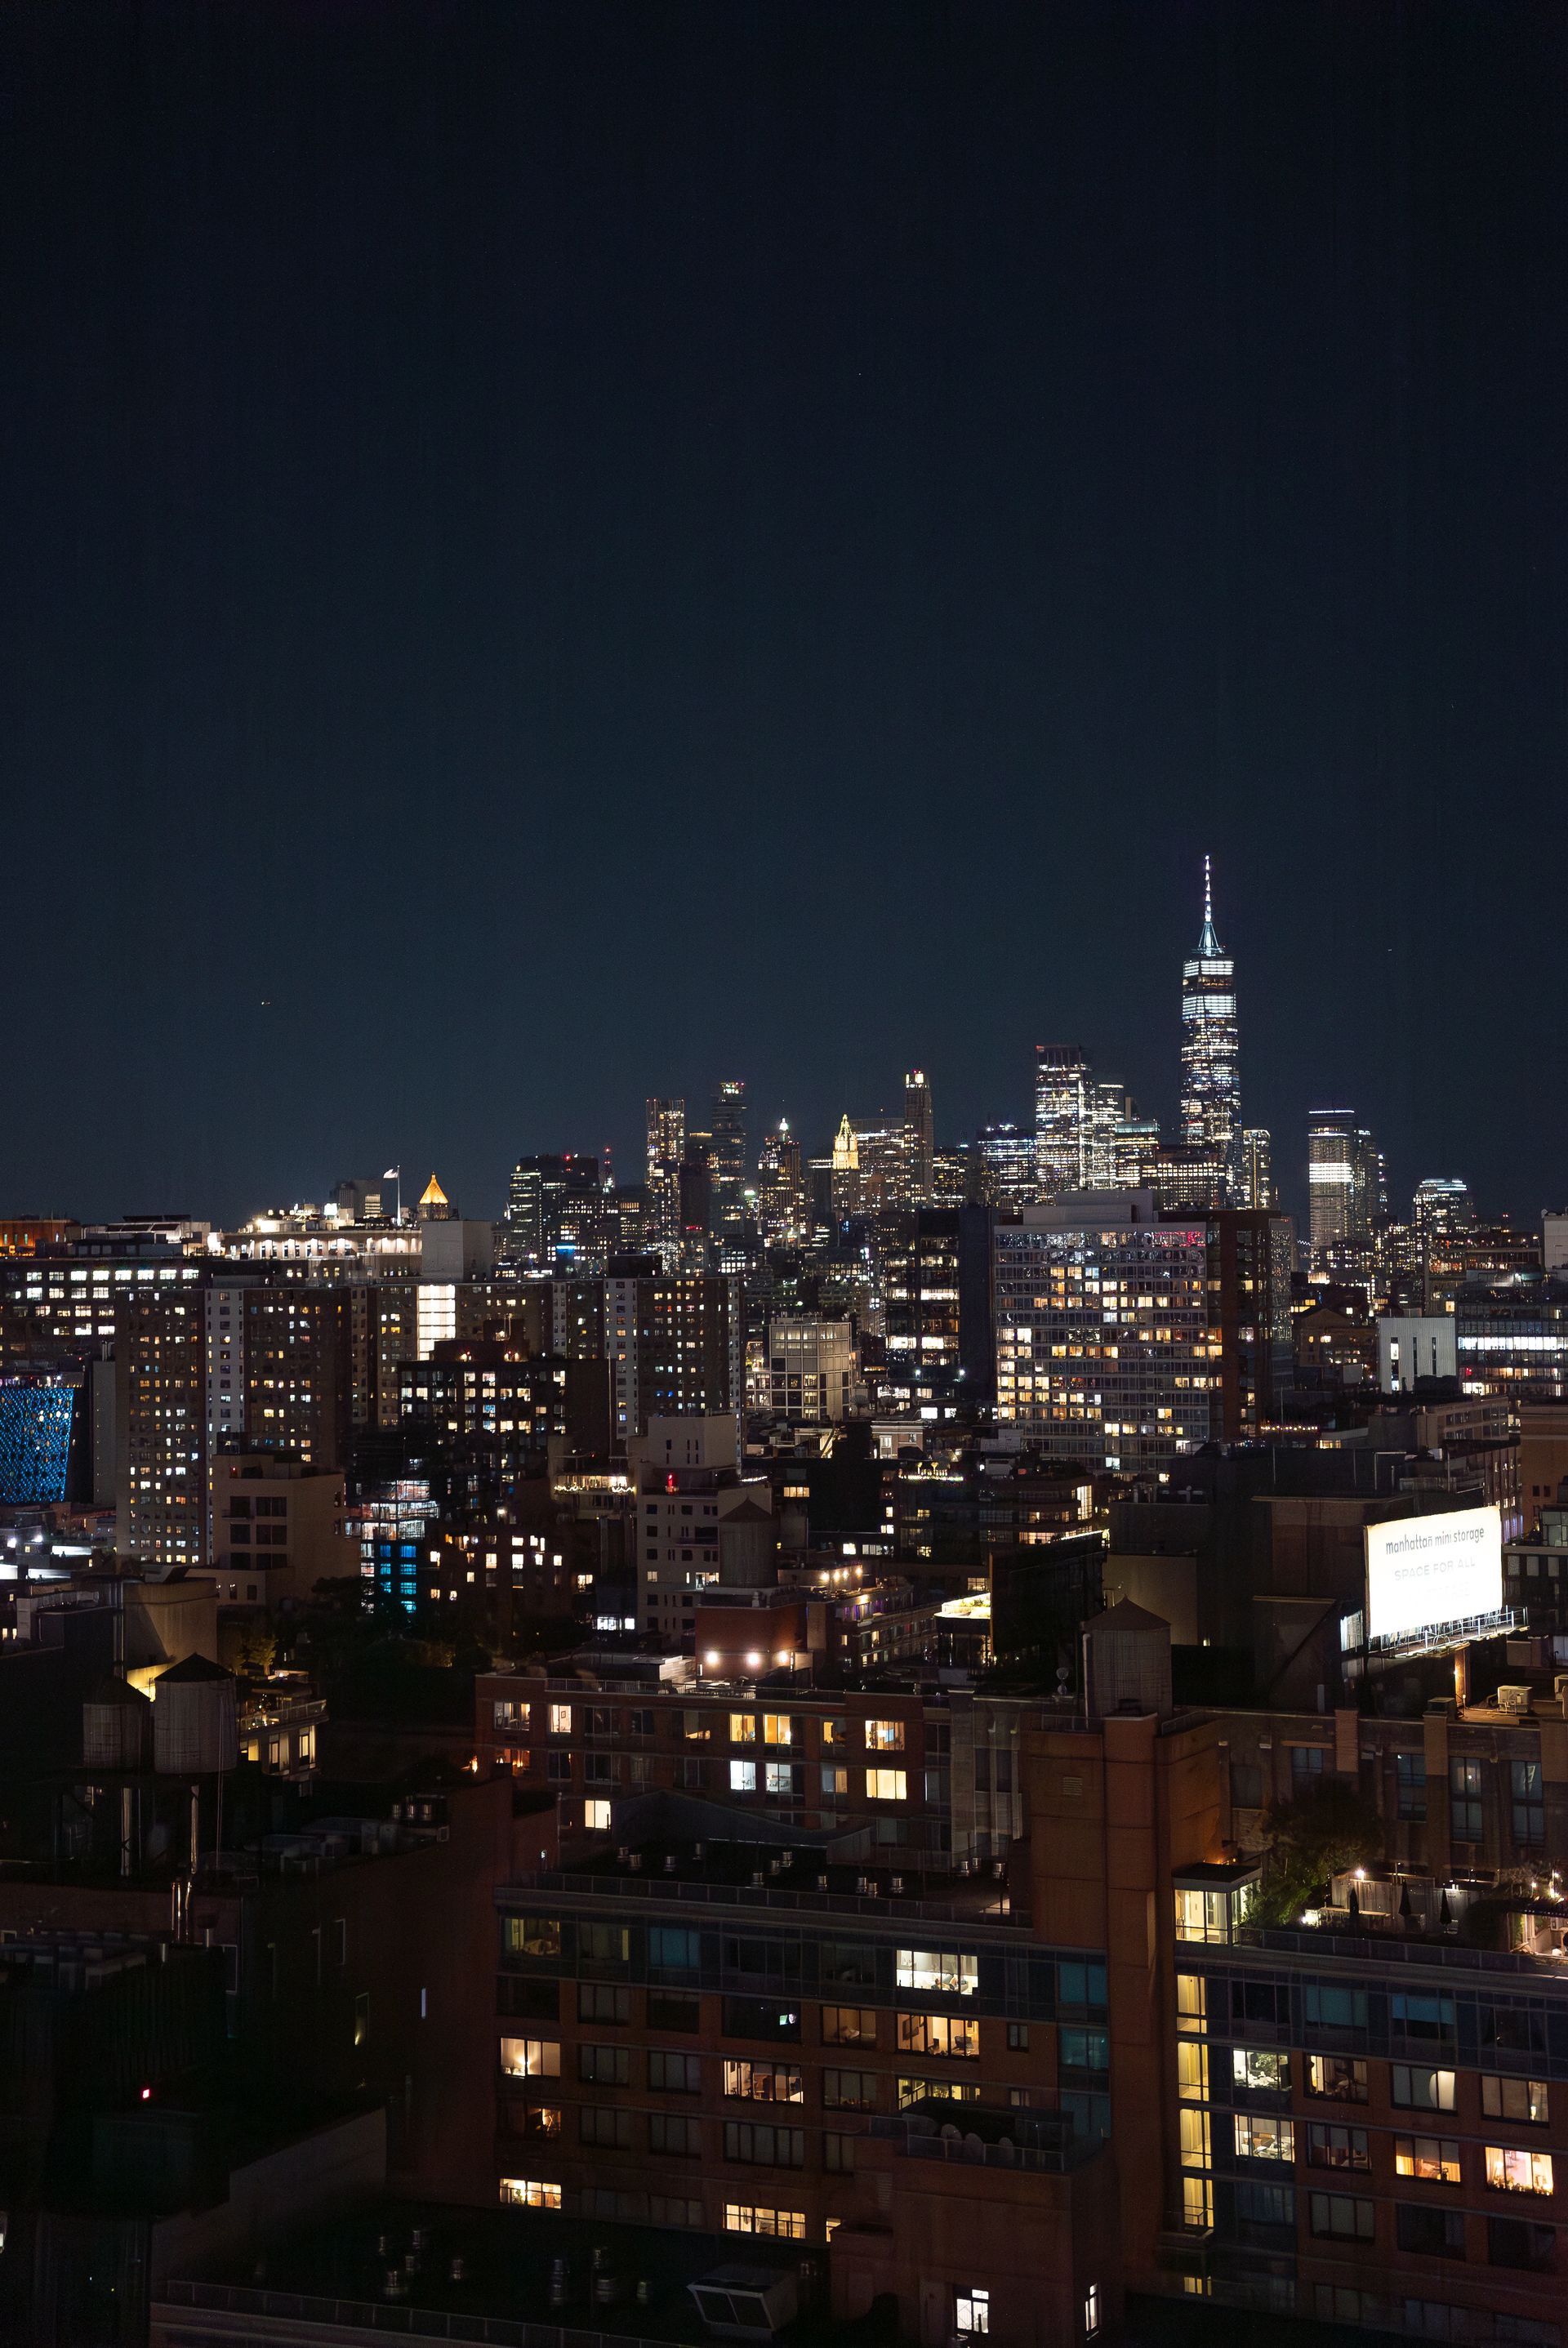 an aerial view of a city skyline at night .